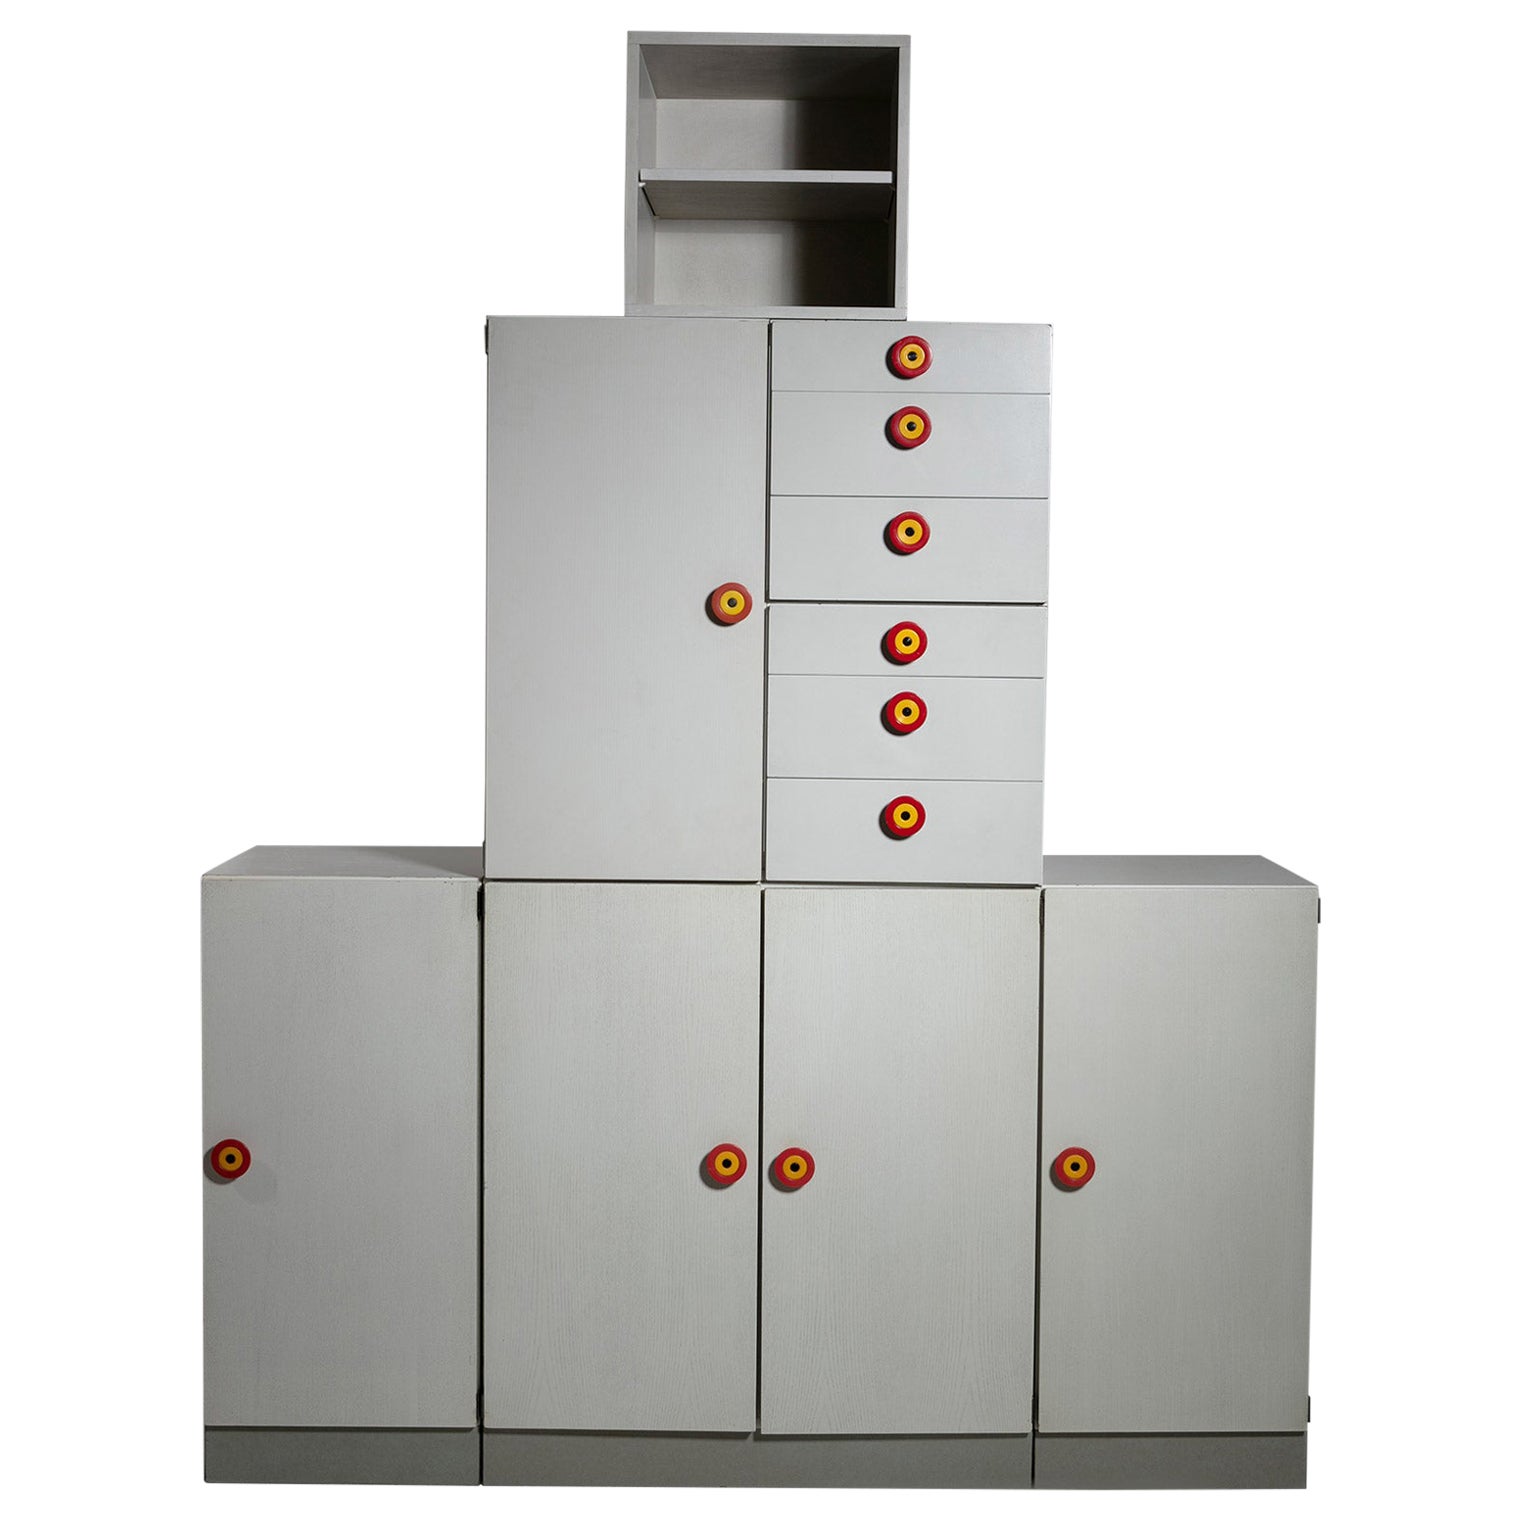 Radical Design Kubirolo Cabinets by Ettore Sottsass for Poltronova, Italy, 1960s For Sale